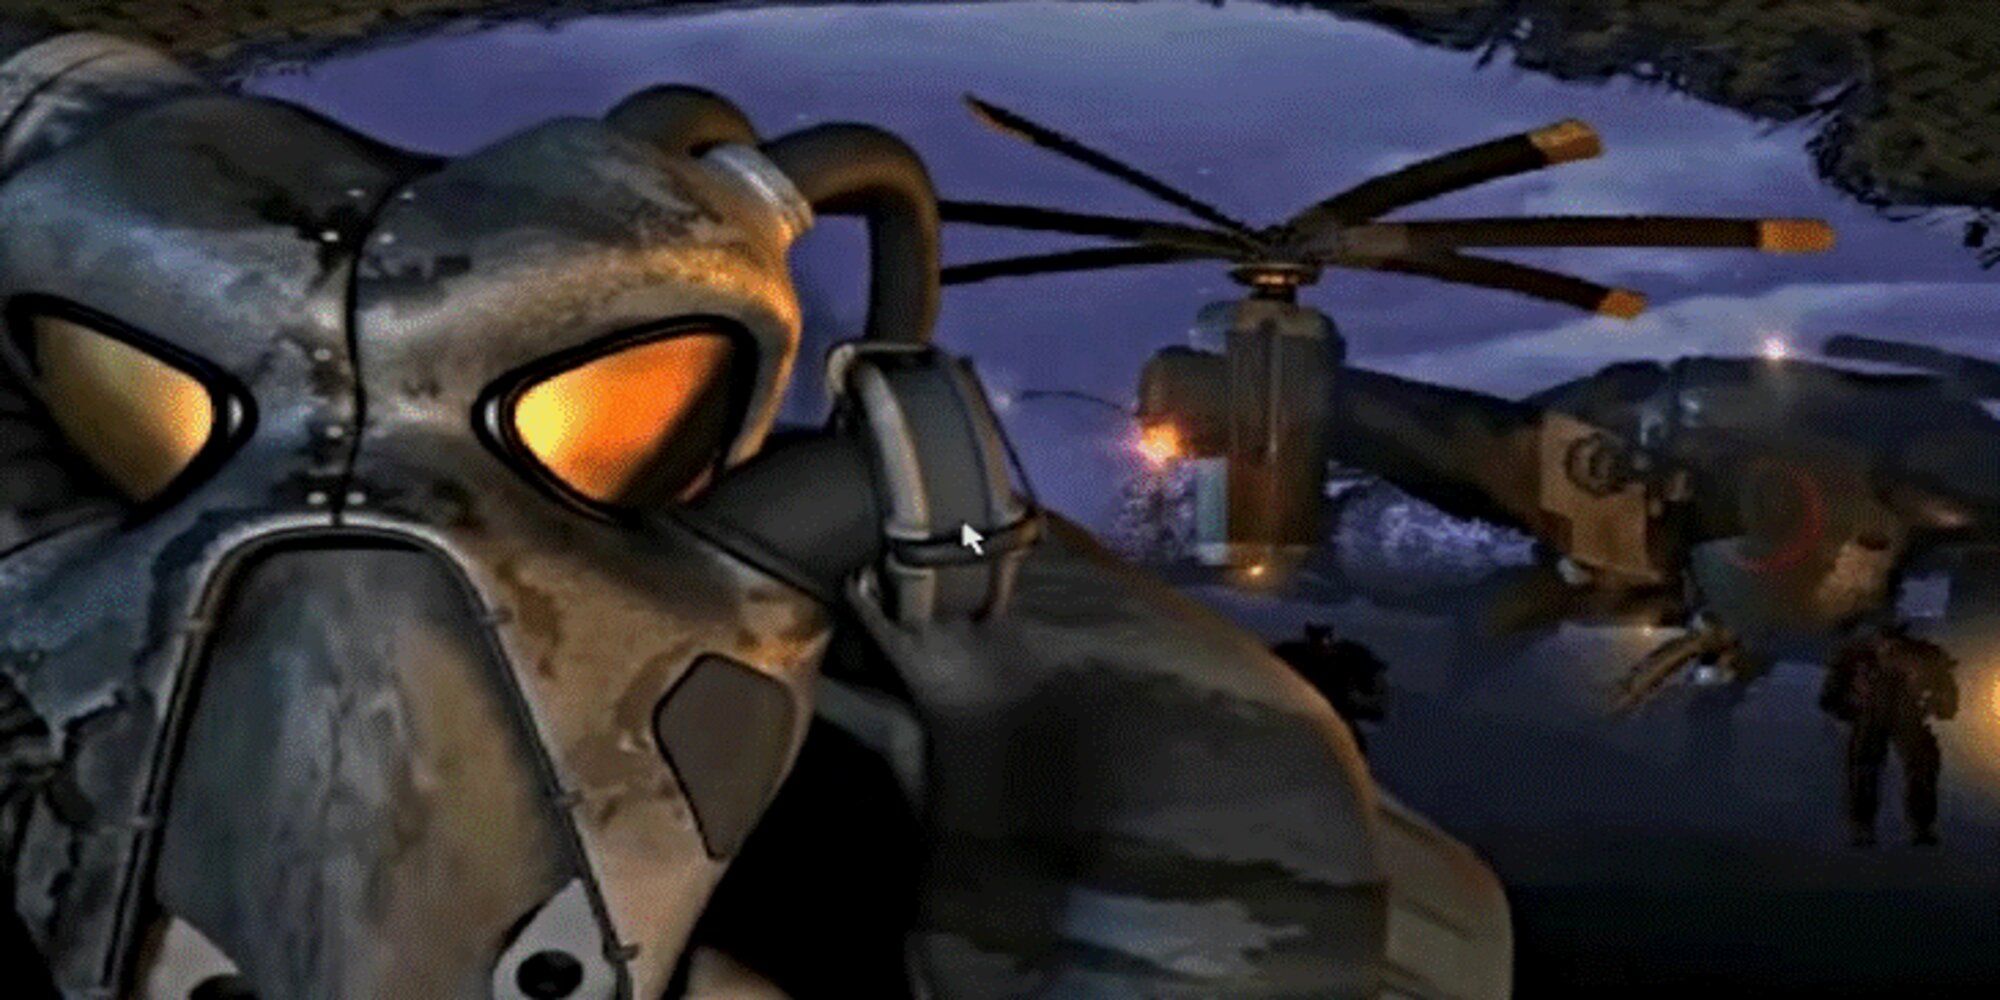 Masked Fallout 2 FPS combatant and a chopper behind